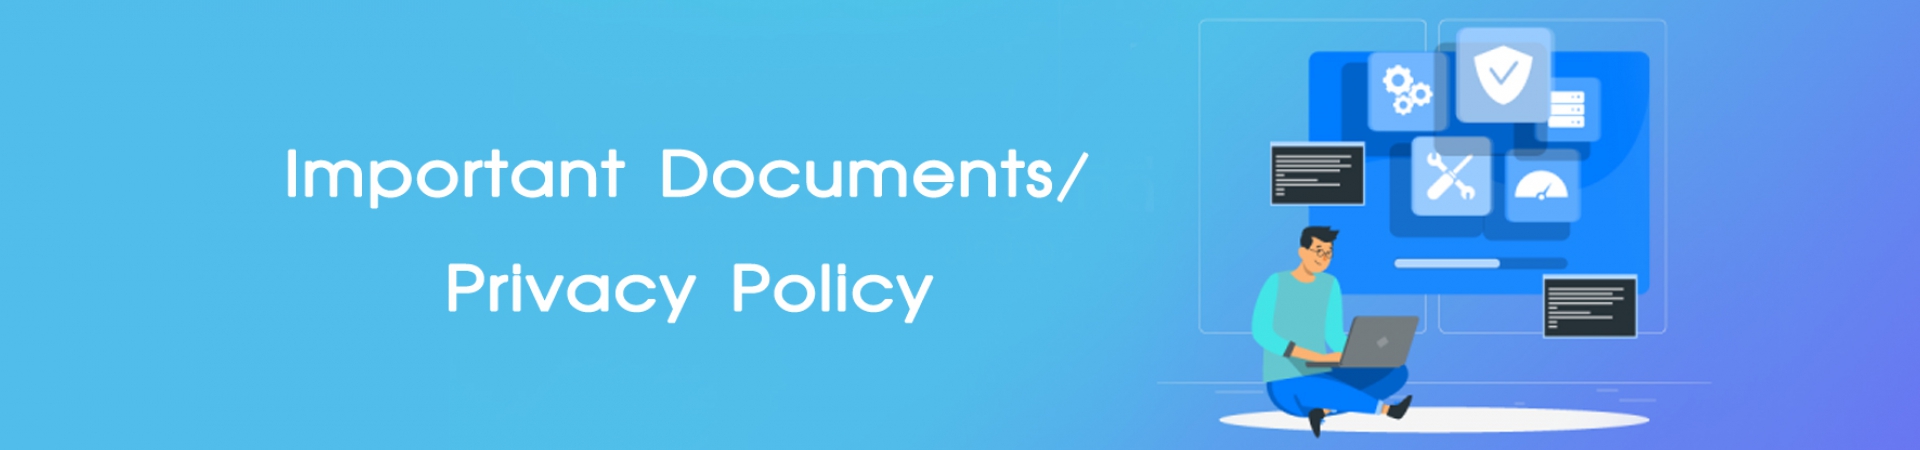 Important Documents/ Privacy Policy